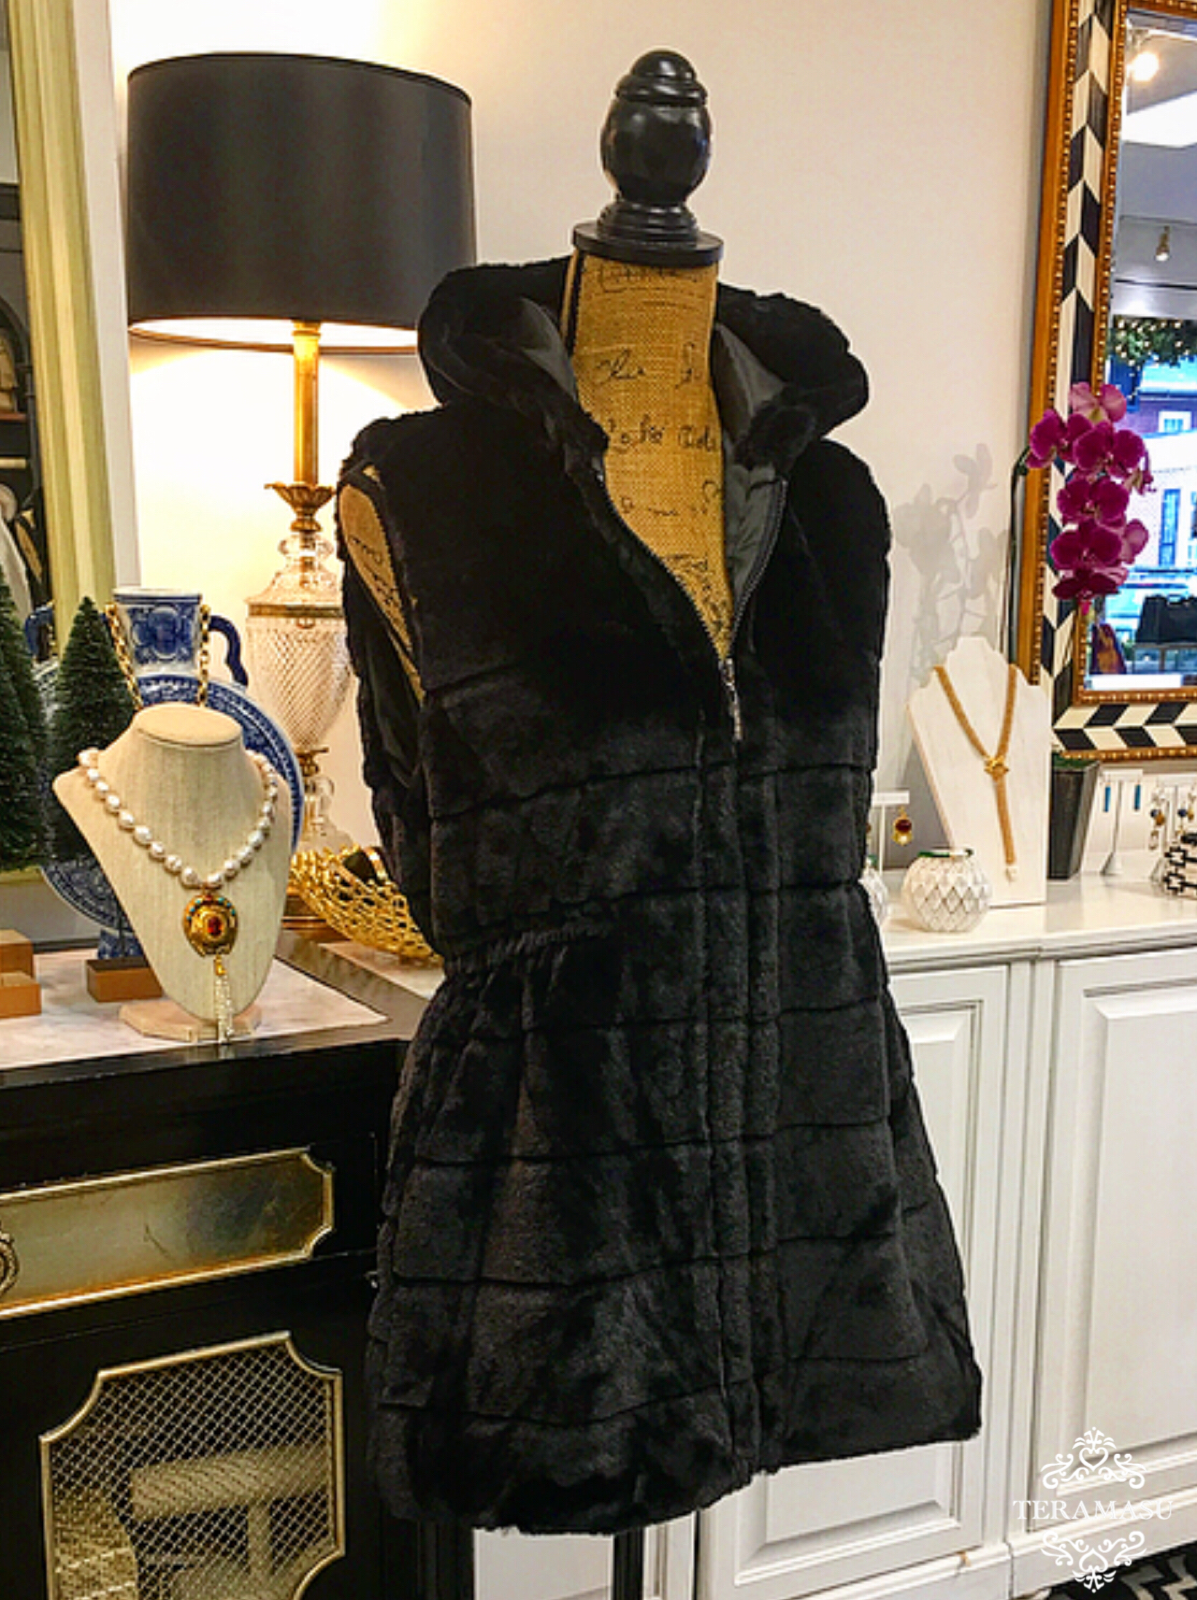 Living Ladylike: The Cutest & Chicest Faux Fur Vest for Your One-of-a-Kind, Cold-Weather Style from Teramasu